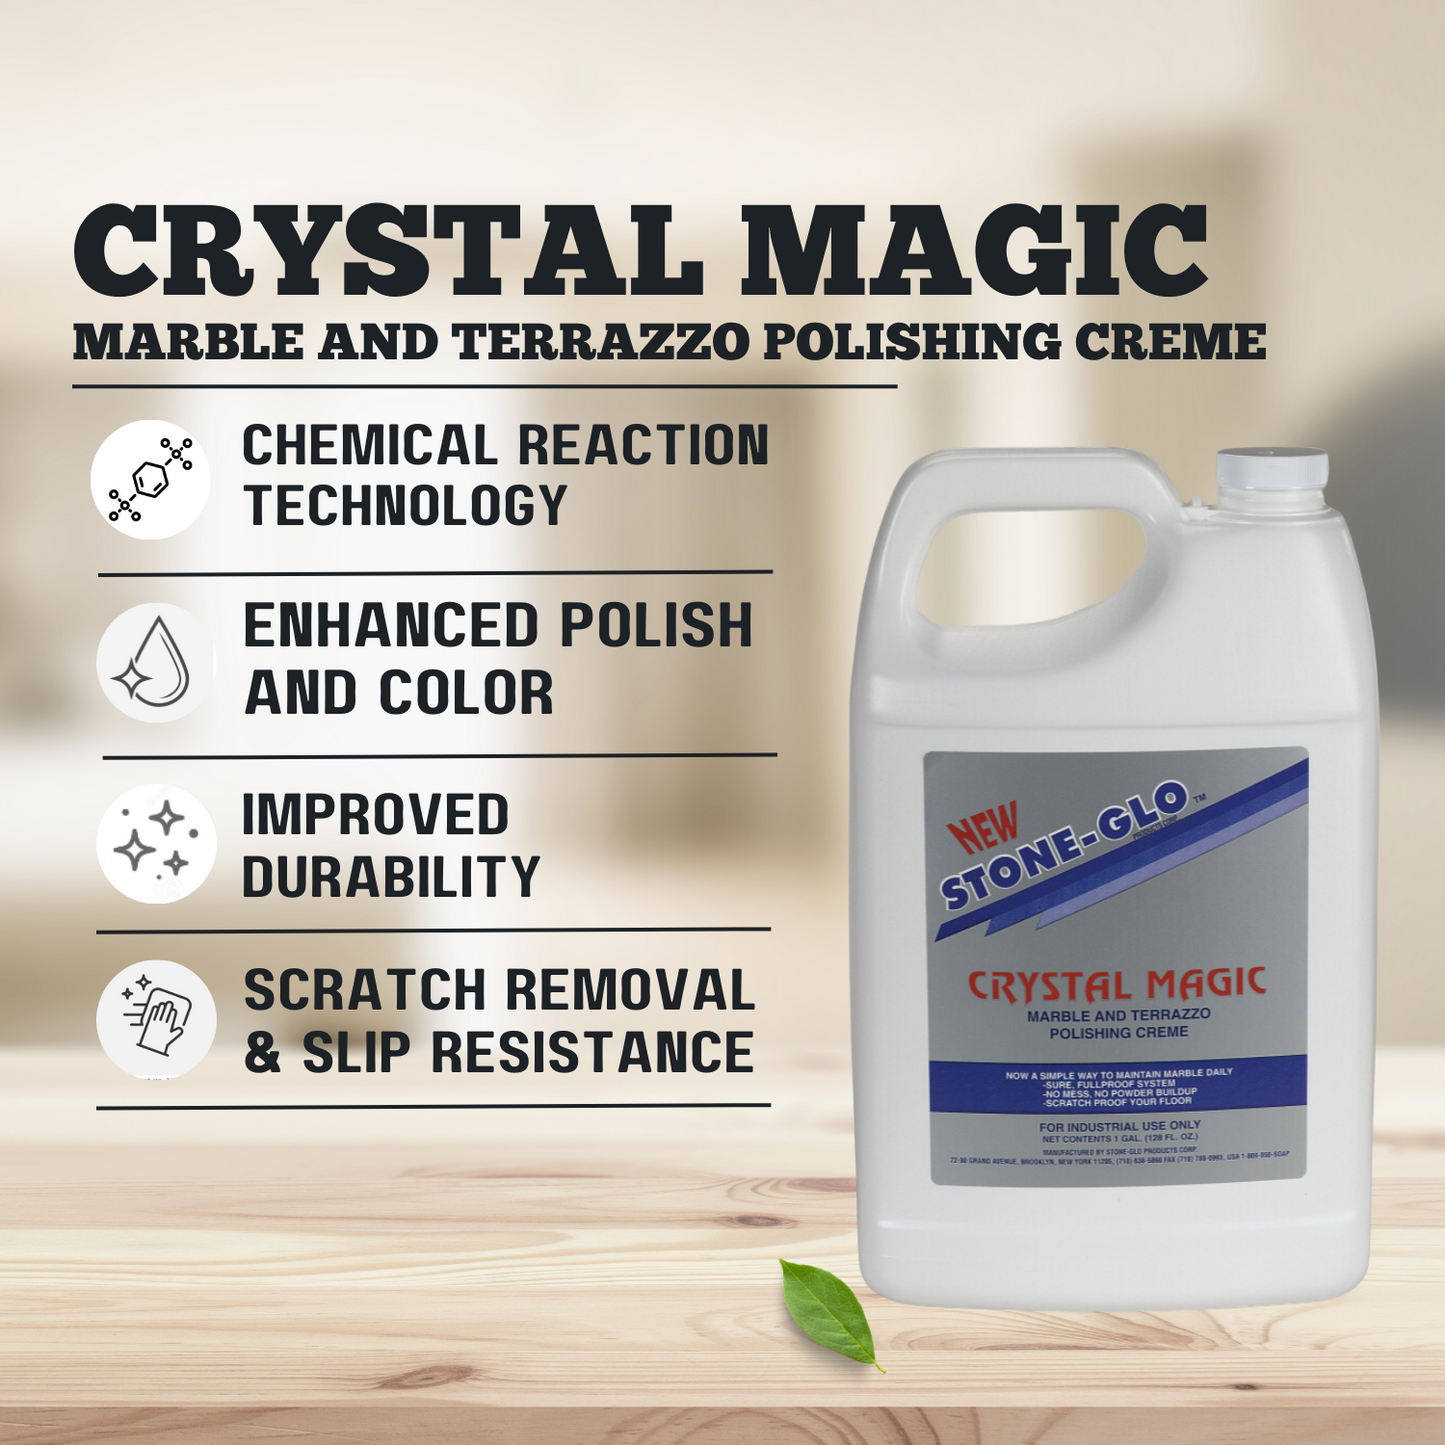 STONE-GLO Crystal Magic - Improve Marble, Travertine & Terrazzo Floor - Polishing Tile Cleaner, Light Scratch Removal (4x1 Gallon Case)